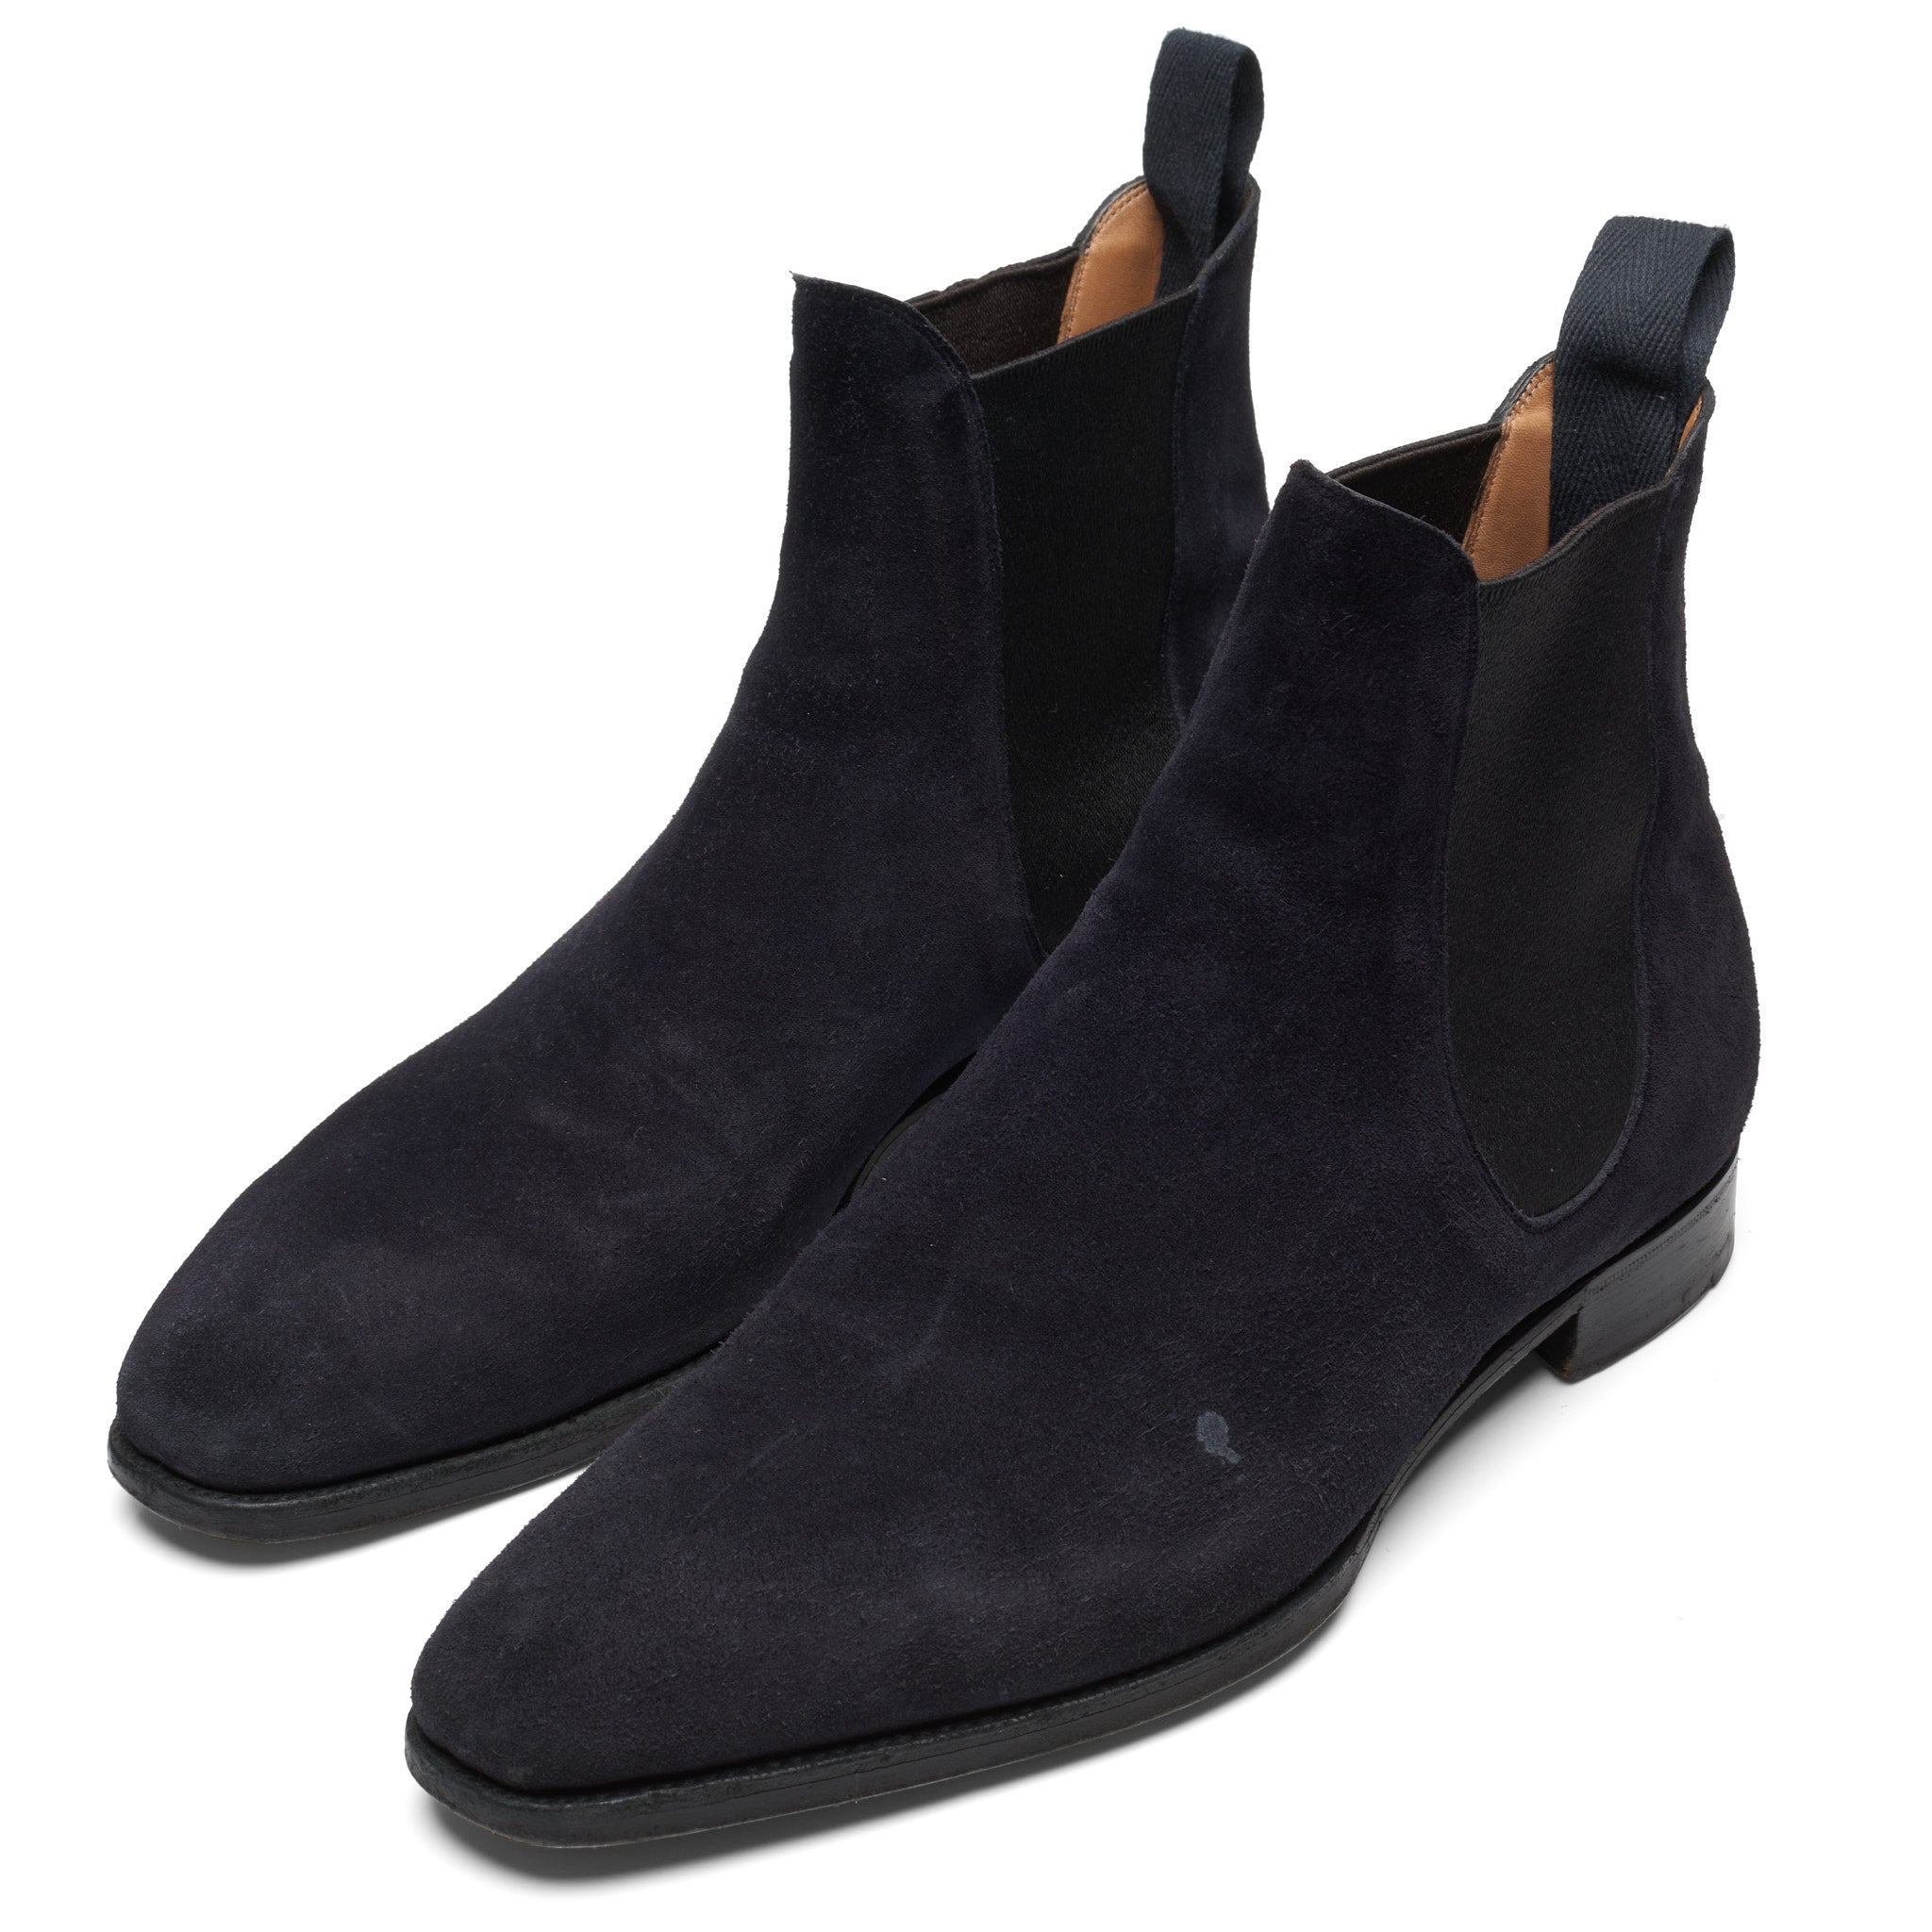 GAZIANO & GIRLING "Burnham" Blue Suede Leather Chelsea Boots UK 8E US 8.5 Last MH71 GAZIANO & GIRLING